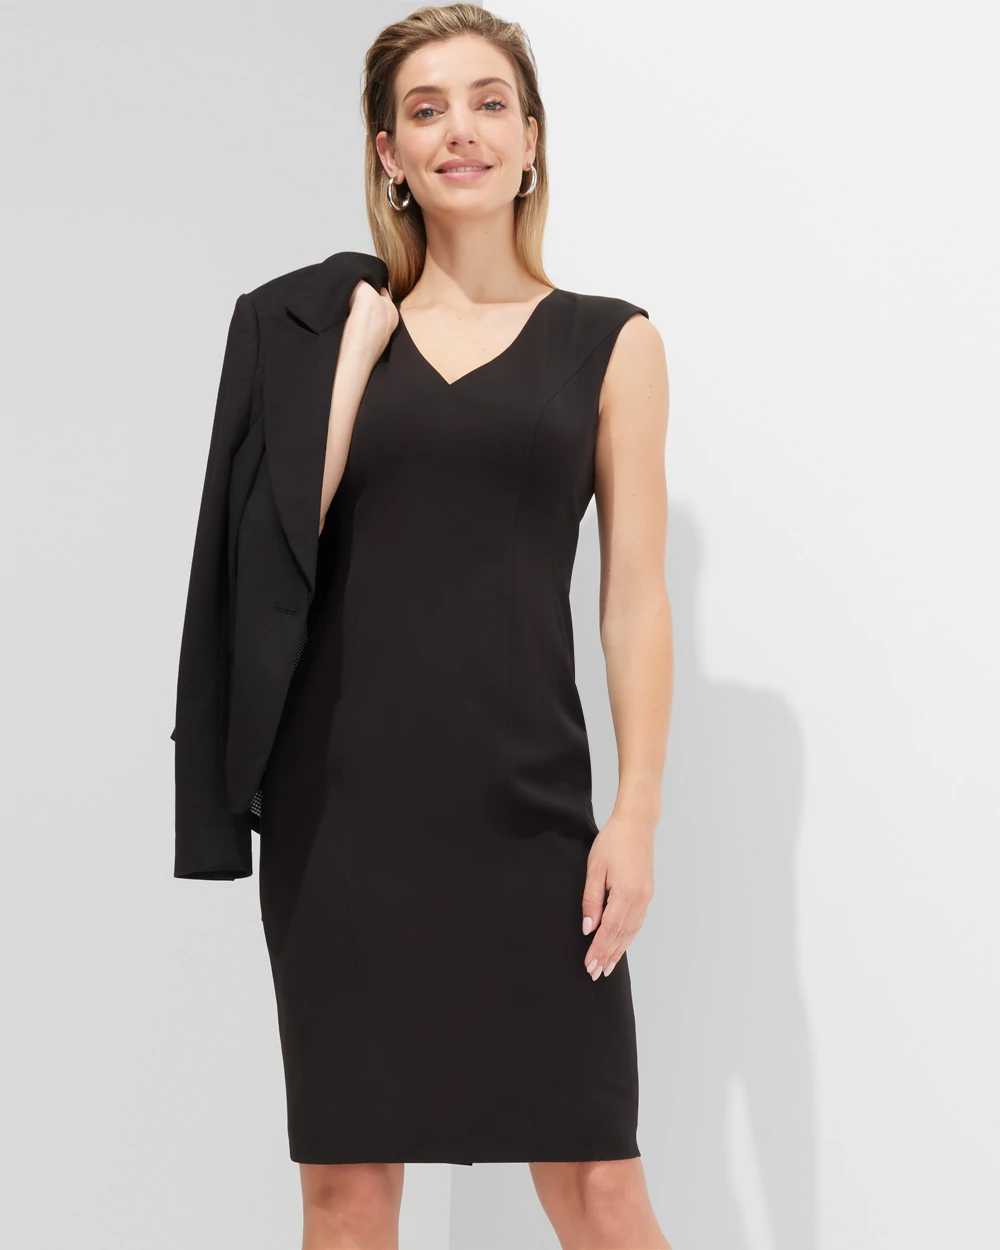 Outlet WHBM Sleeveless V-Neck Shift Dress click to view larger image.